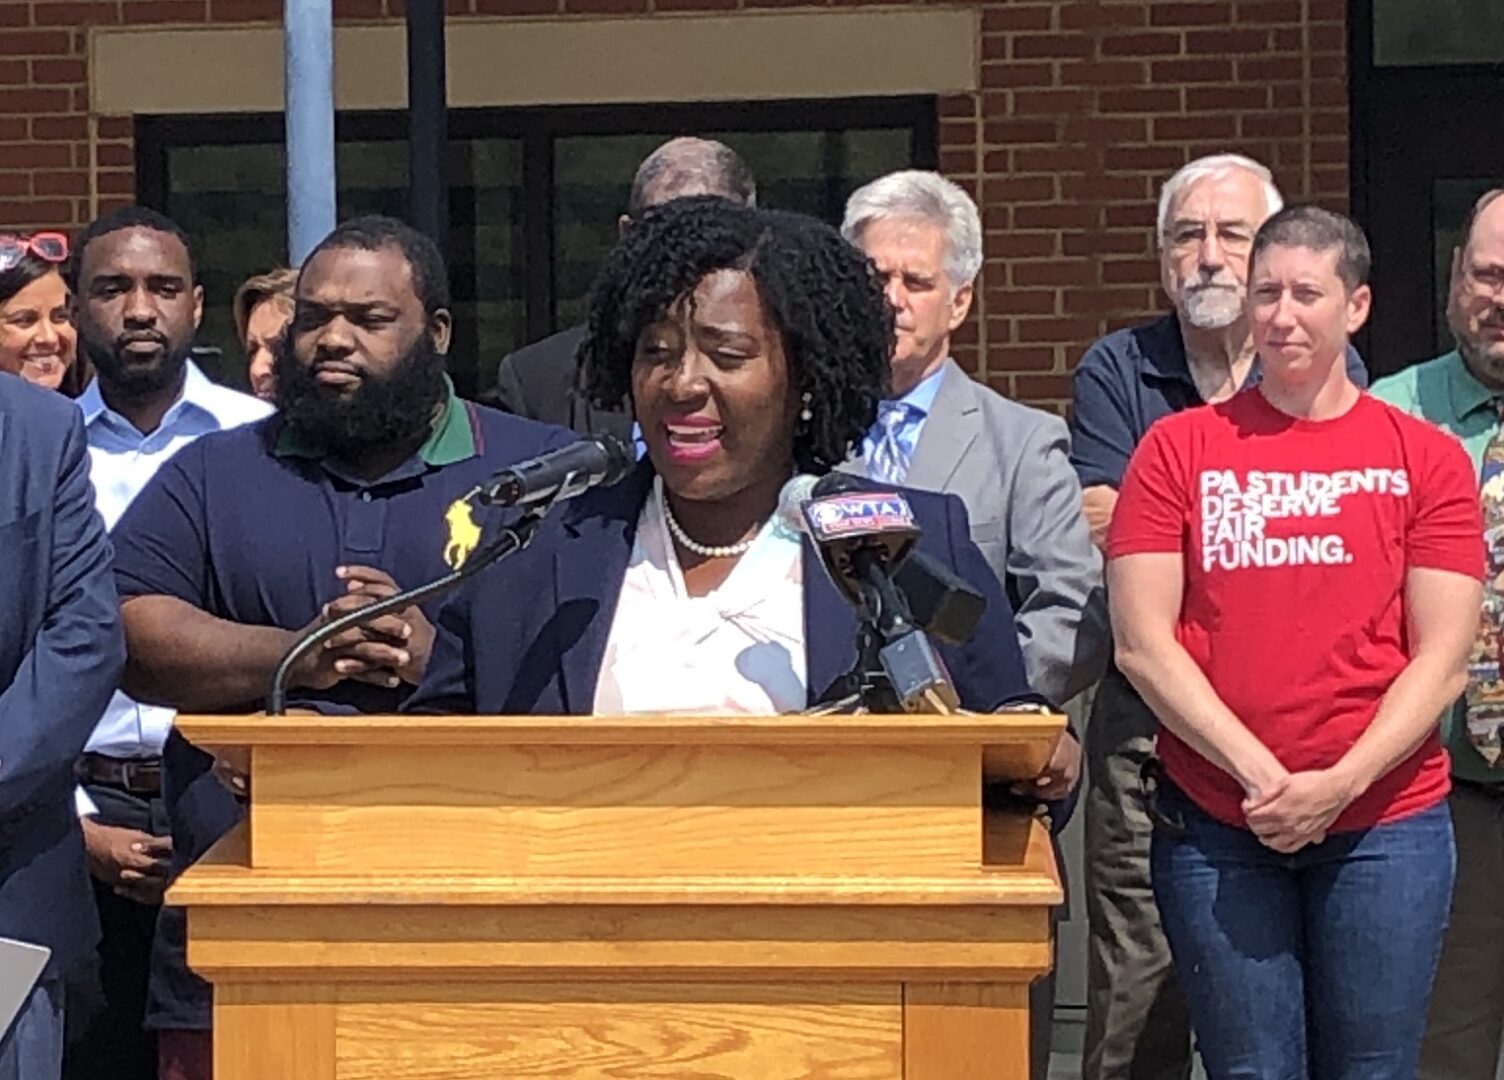 Democratic House Speaker Joanna McClinton stands in front of a podium at the Bald Eagle Area School District as part of a rally to advocate for public school funding.
